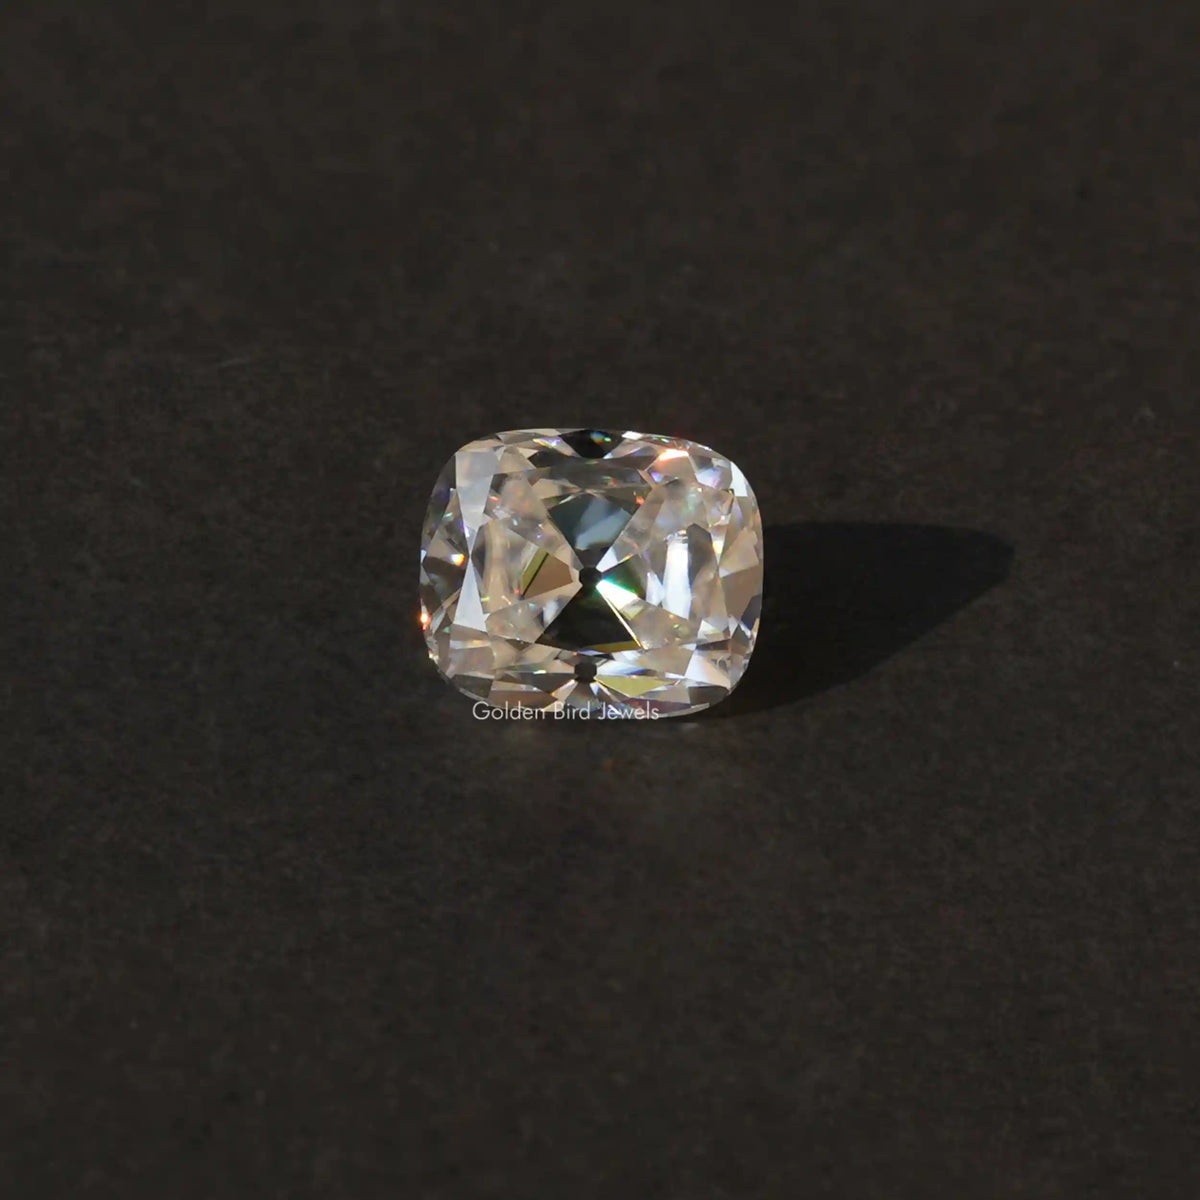 [Front view of old mine cushion cut loose stone made with vvs clarity]-[Golden Bird Jewels]